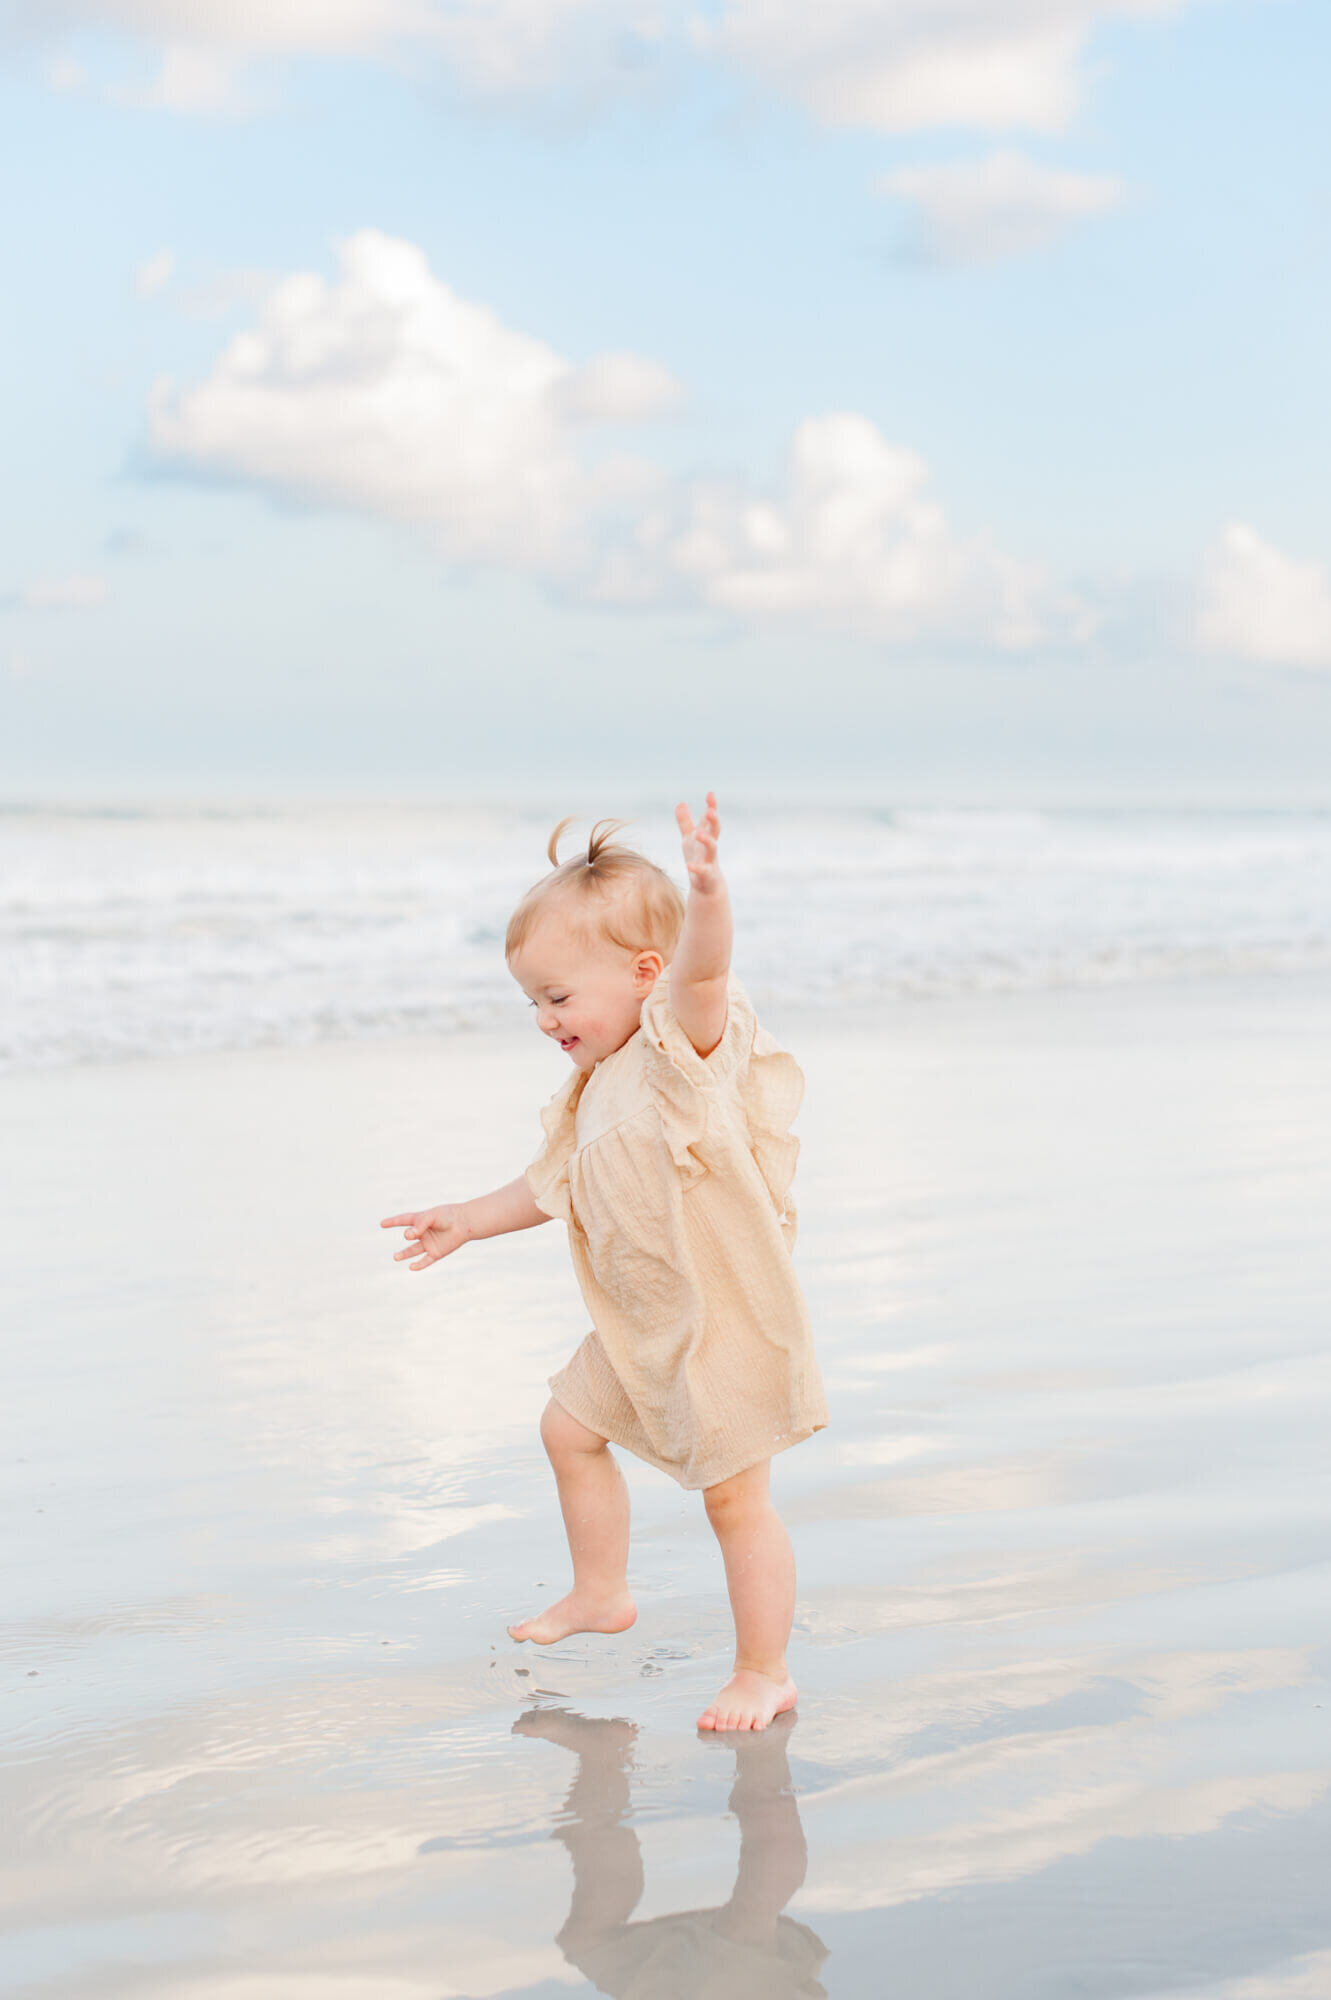 Young girl wearing adorable cream dress runs in the ocean water during their family session